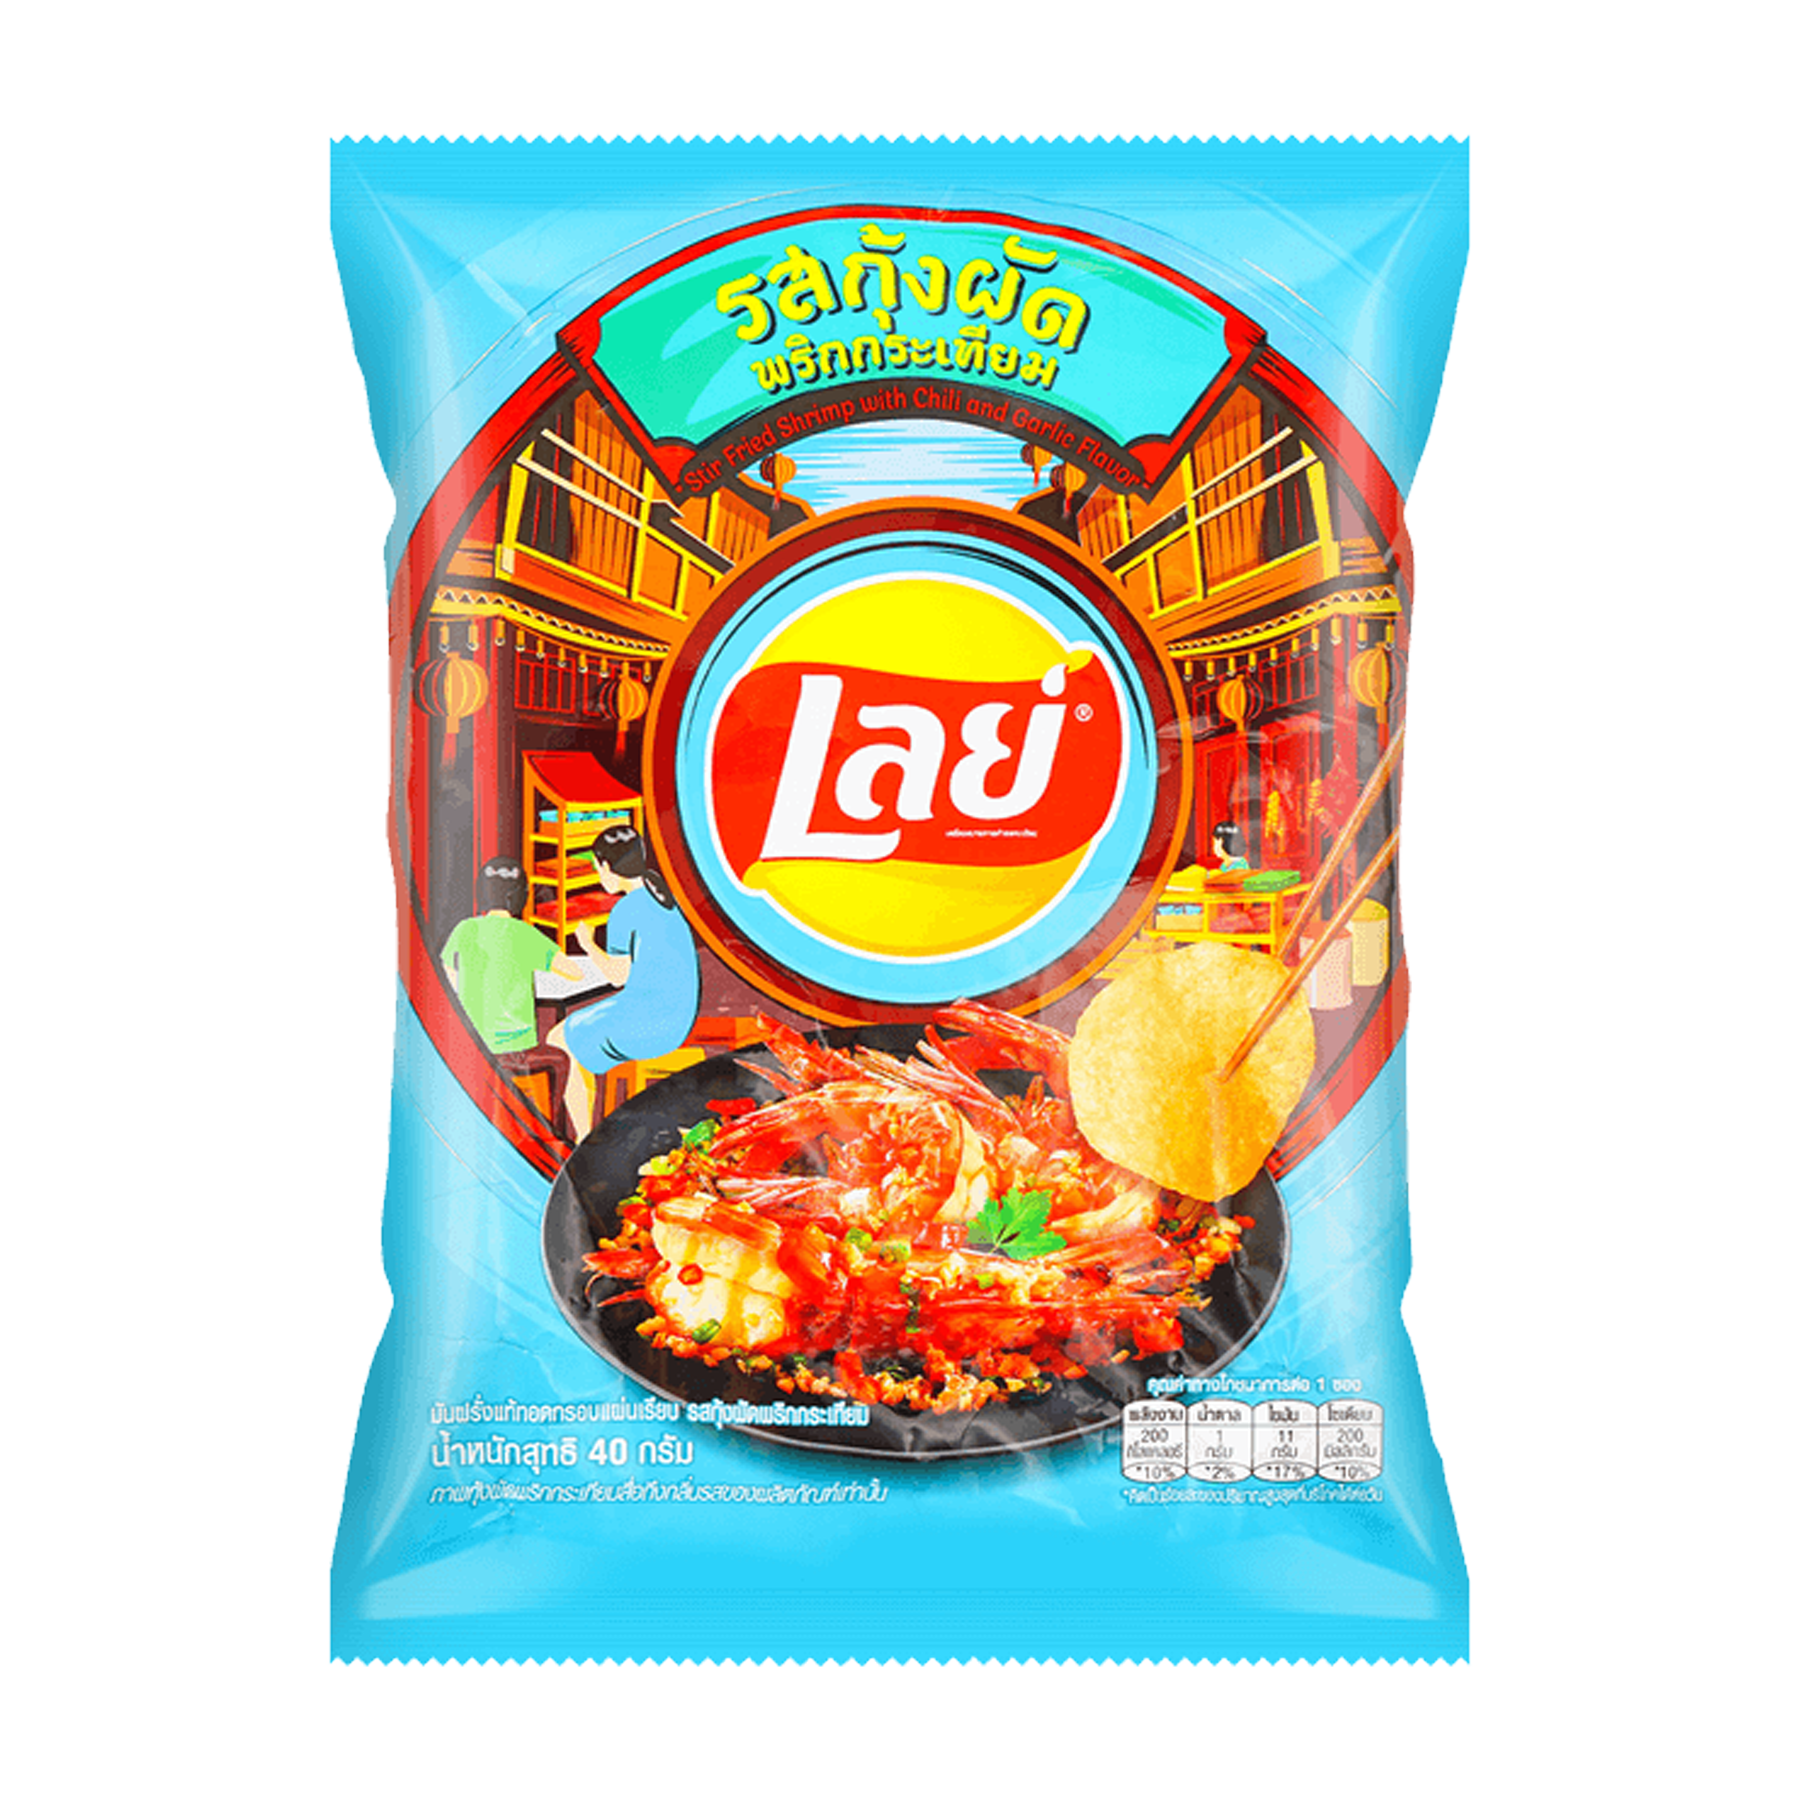 Lays Stir Fried Shrimp With Chili Flavored Chips